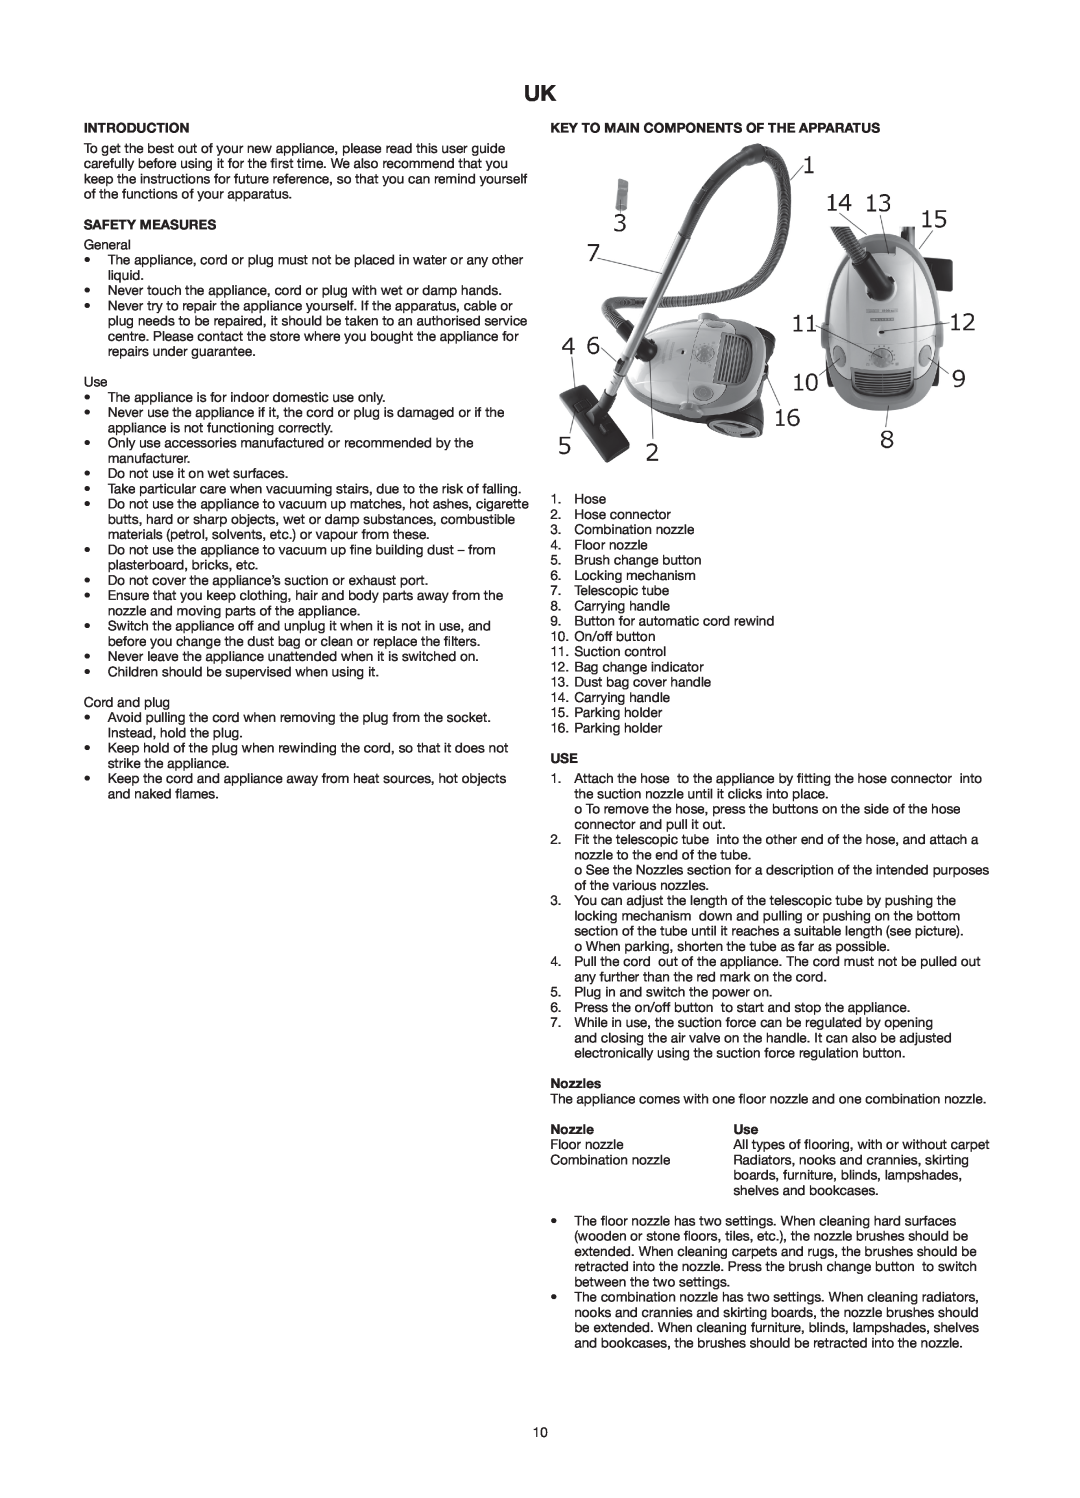 Melissa 640-141 manual Introduction, Safety Measures, Key To Main Components Of The Apparatus, Nozzles 